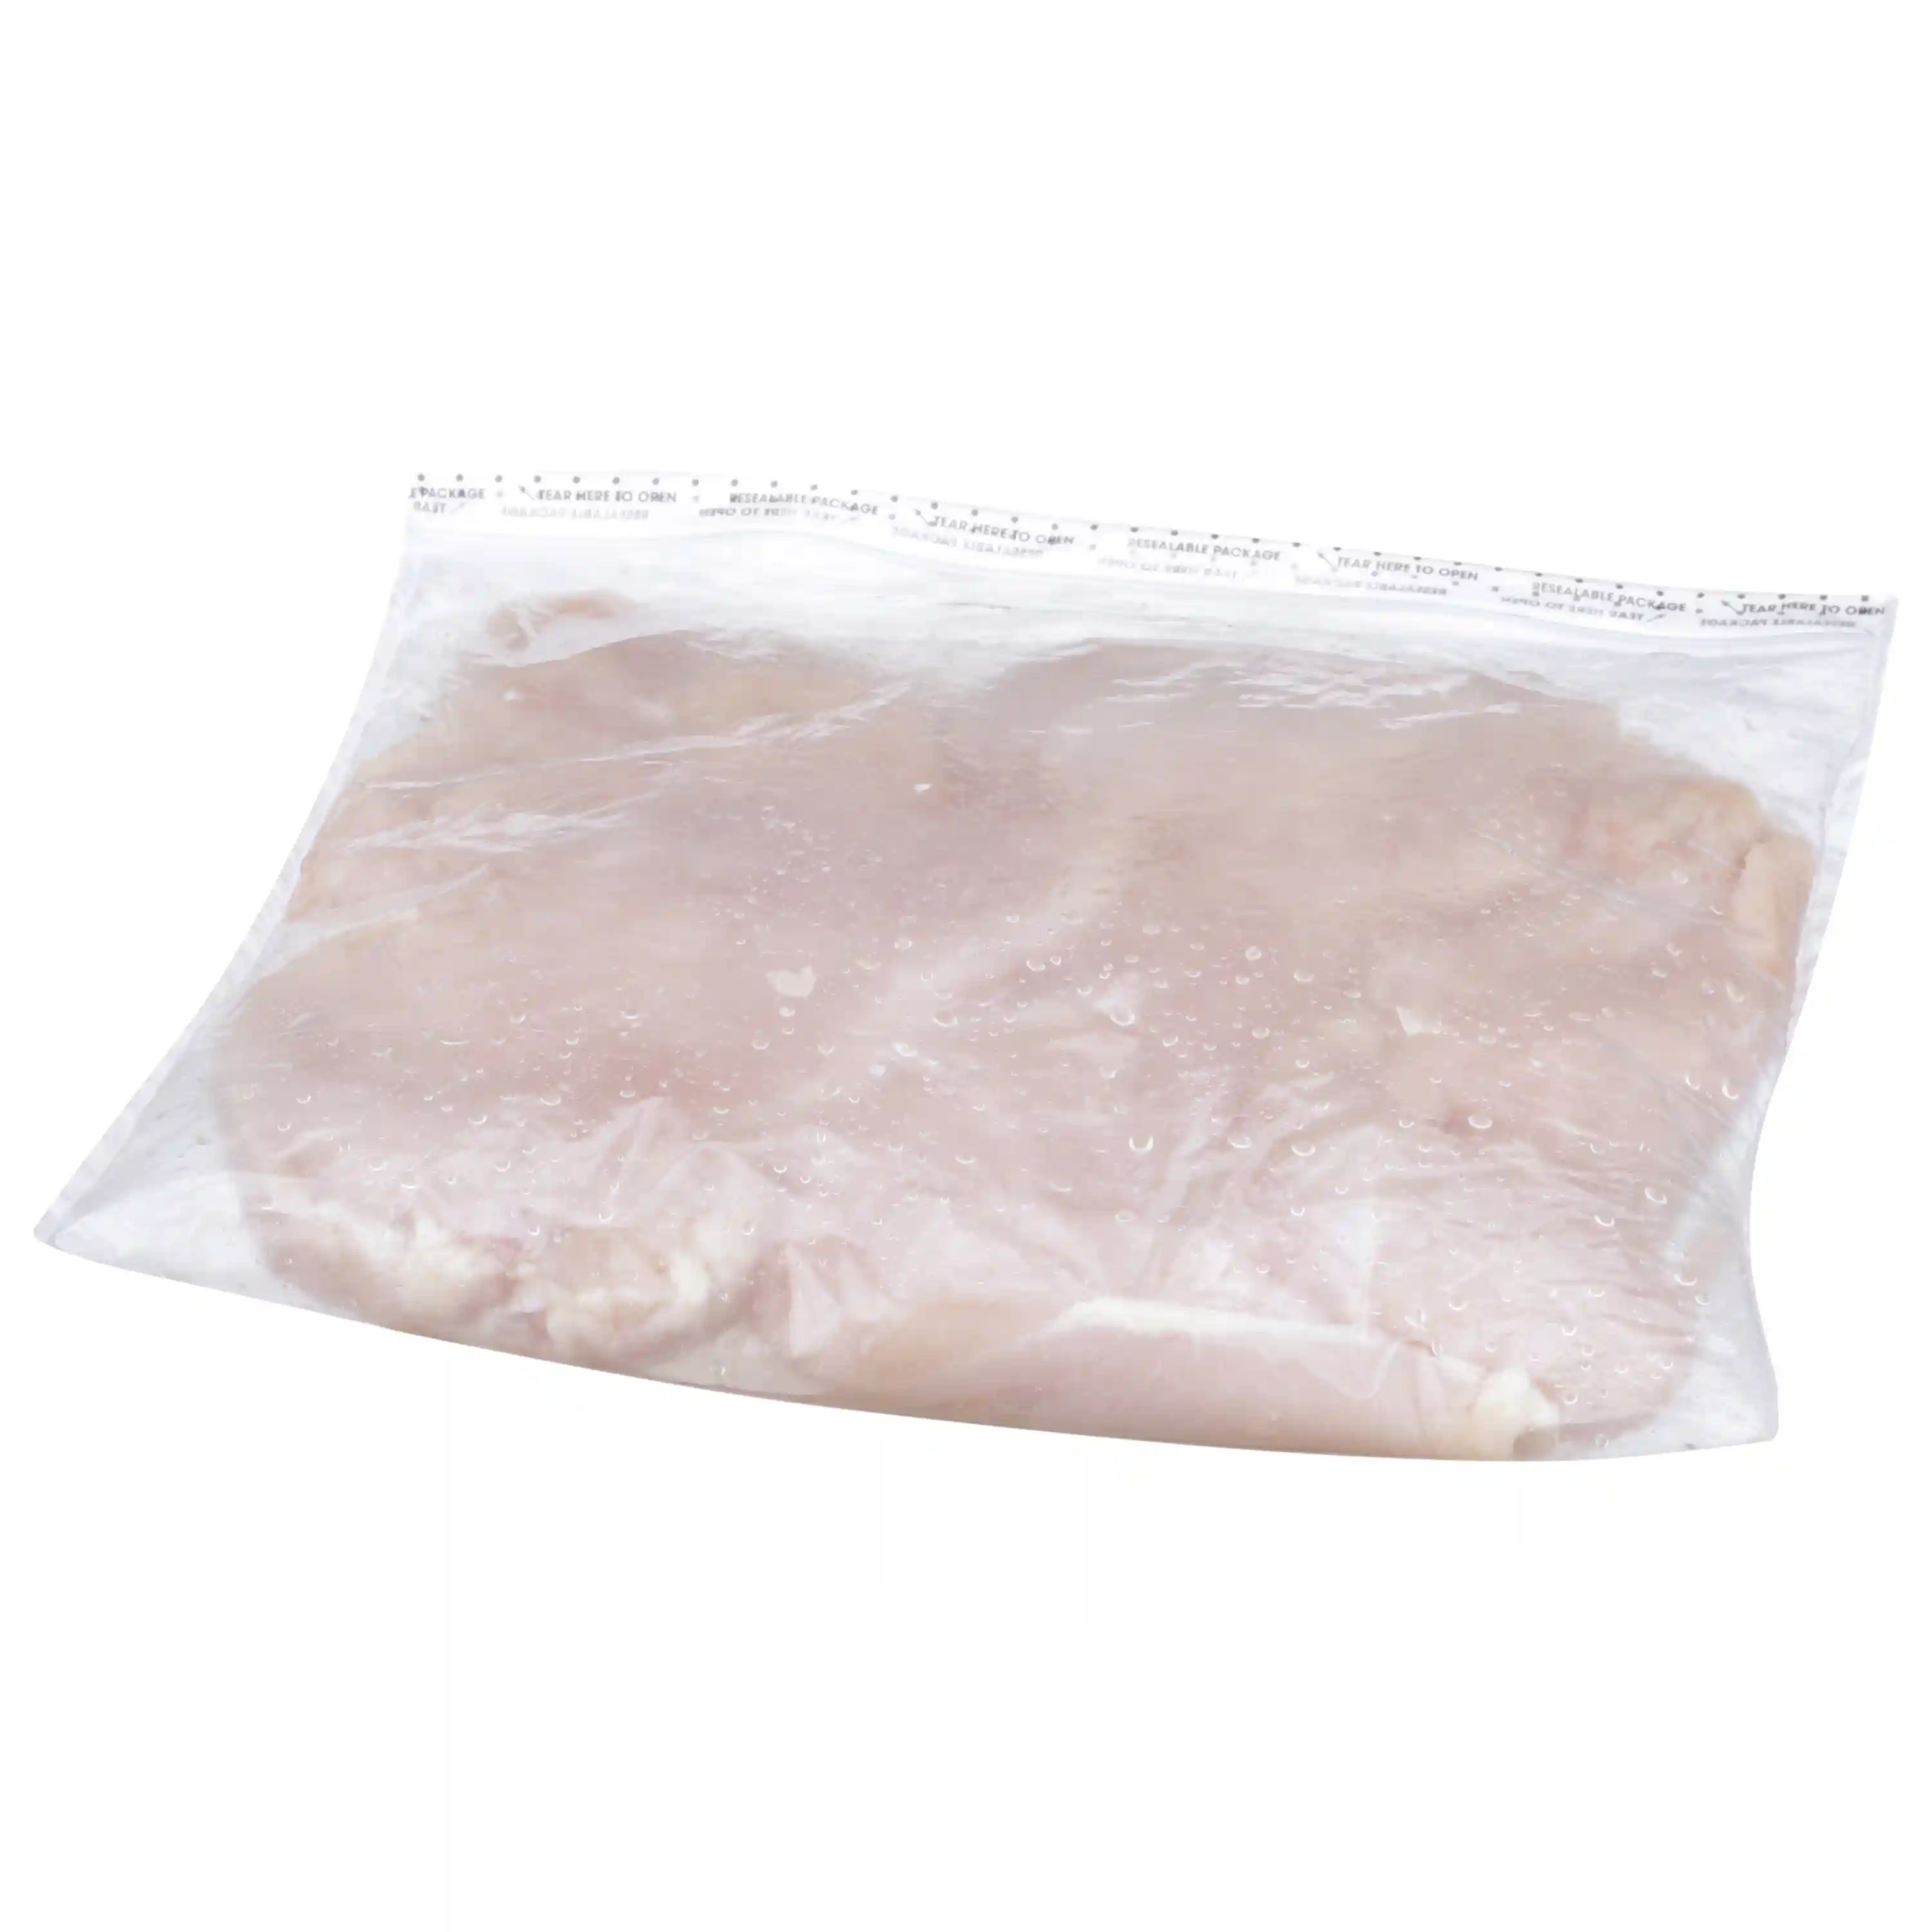 Tyson® All Natural* IF Unbreaded Boneless Skinless Chicken Breast Filets, 8 oz._image_11